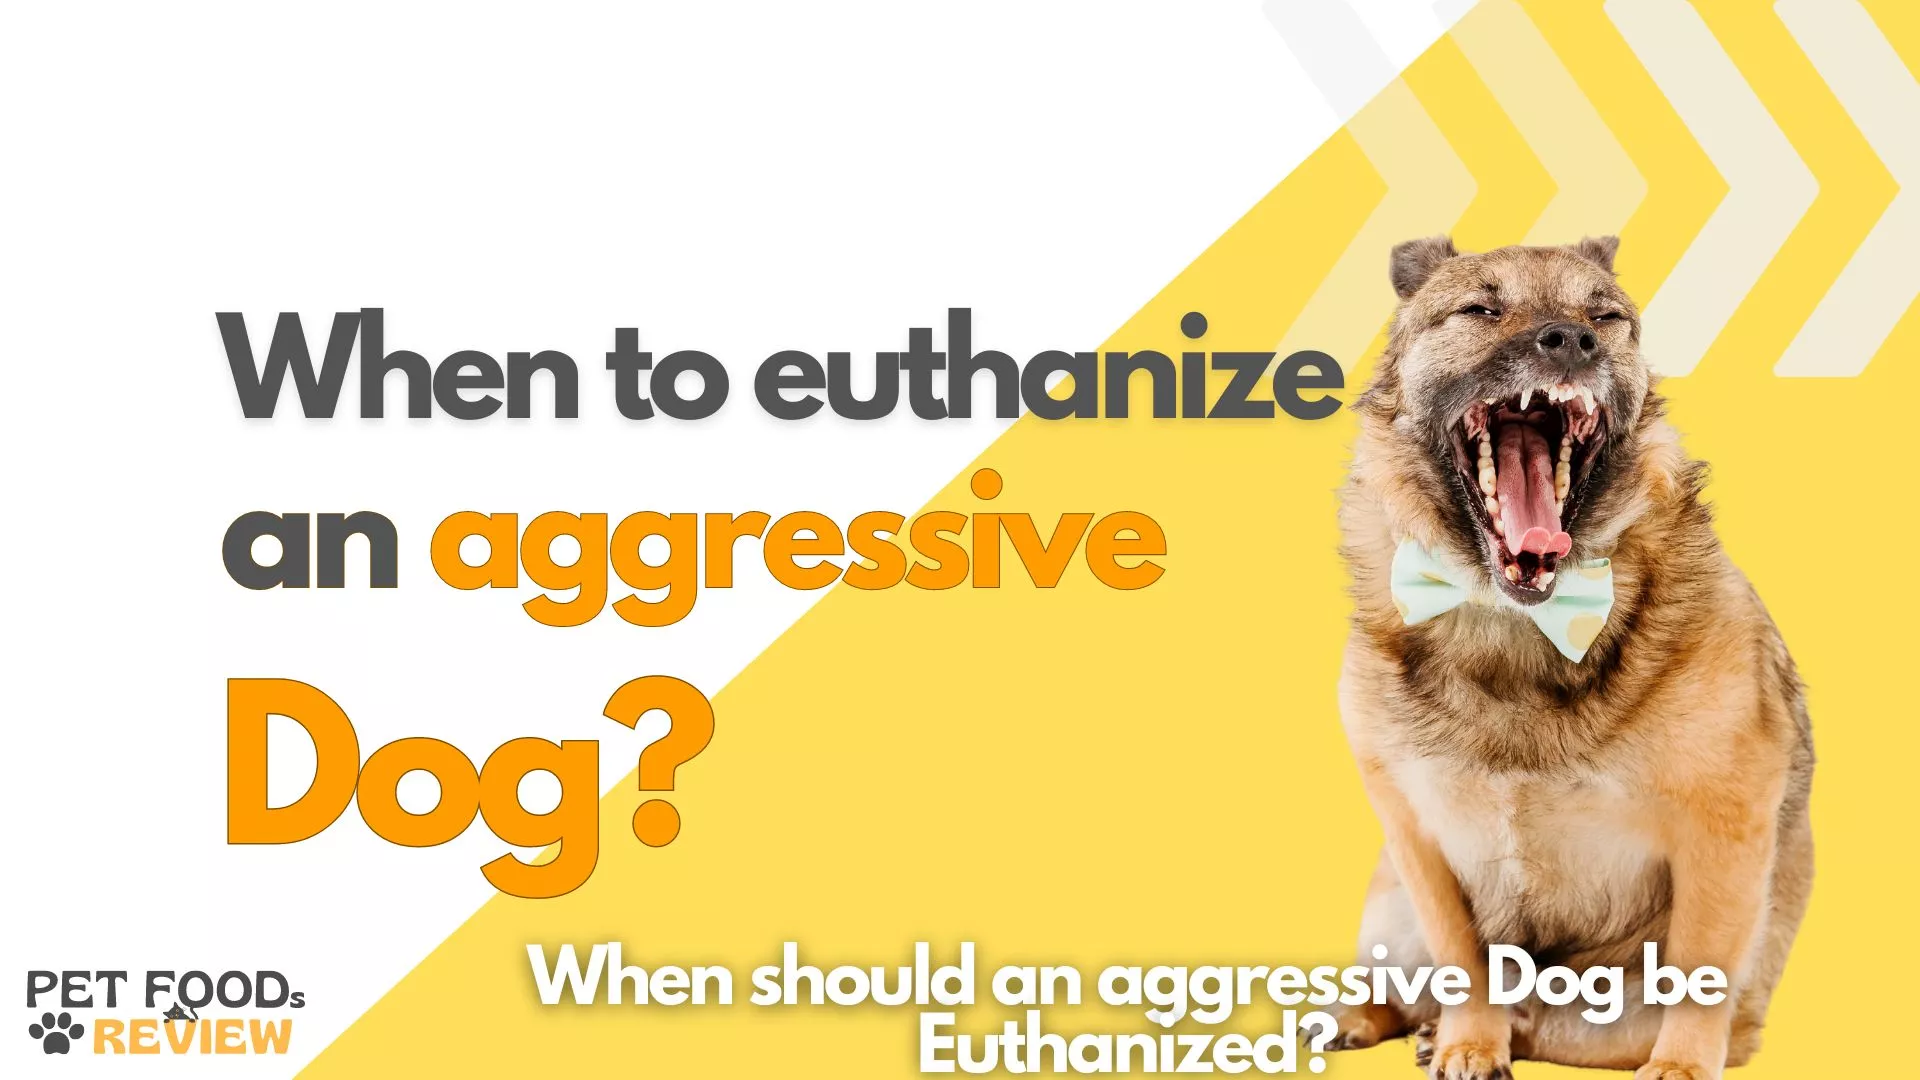 When should an aggressive Dog be Euthanized?